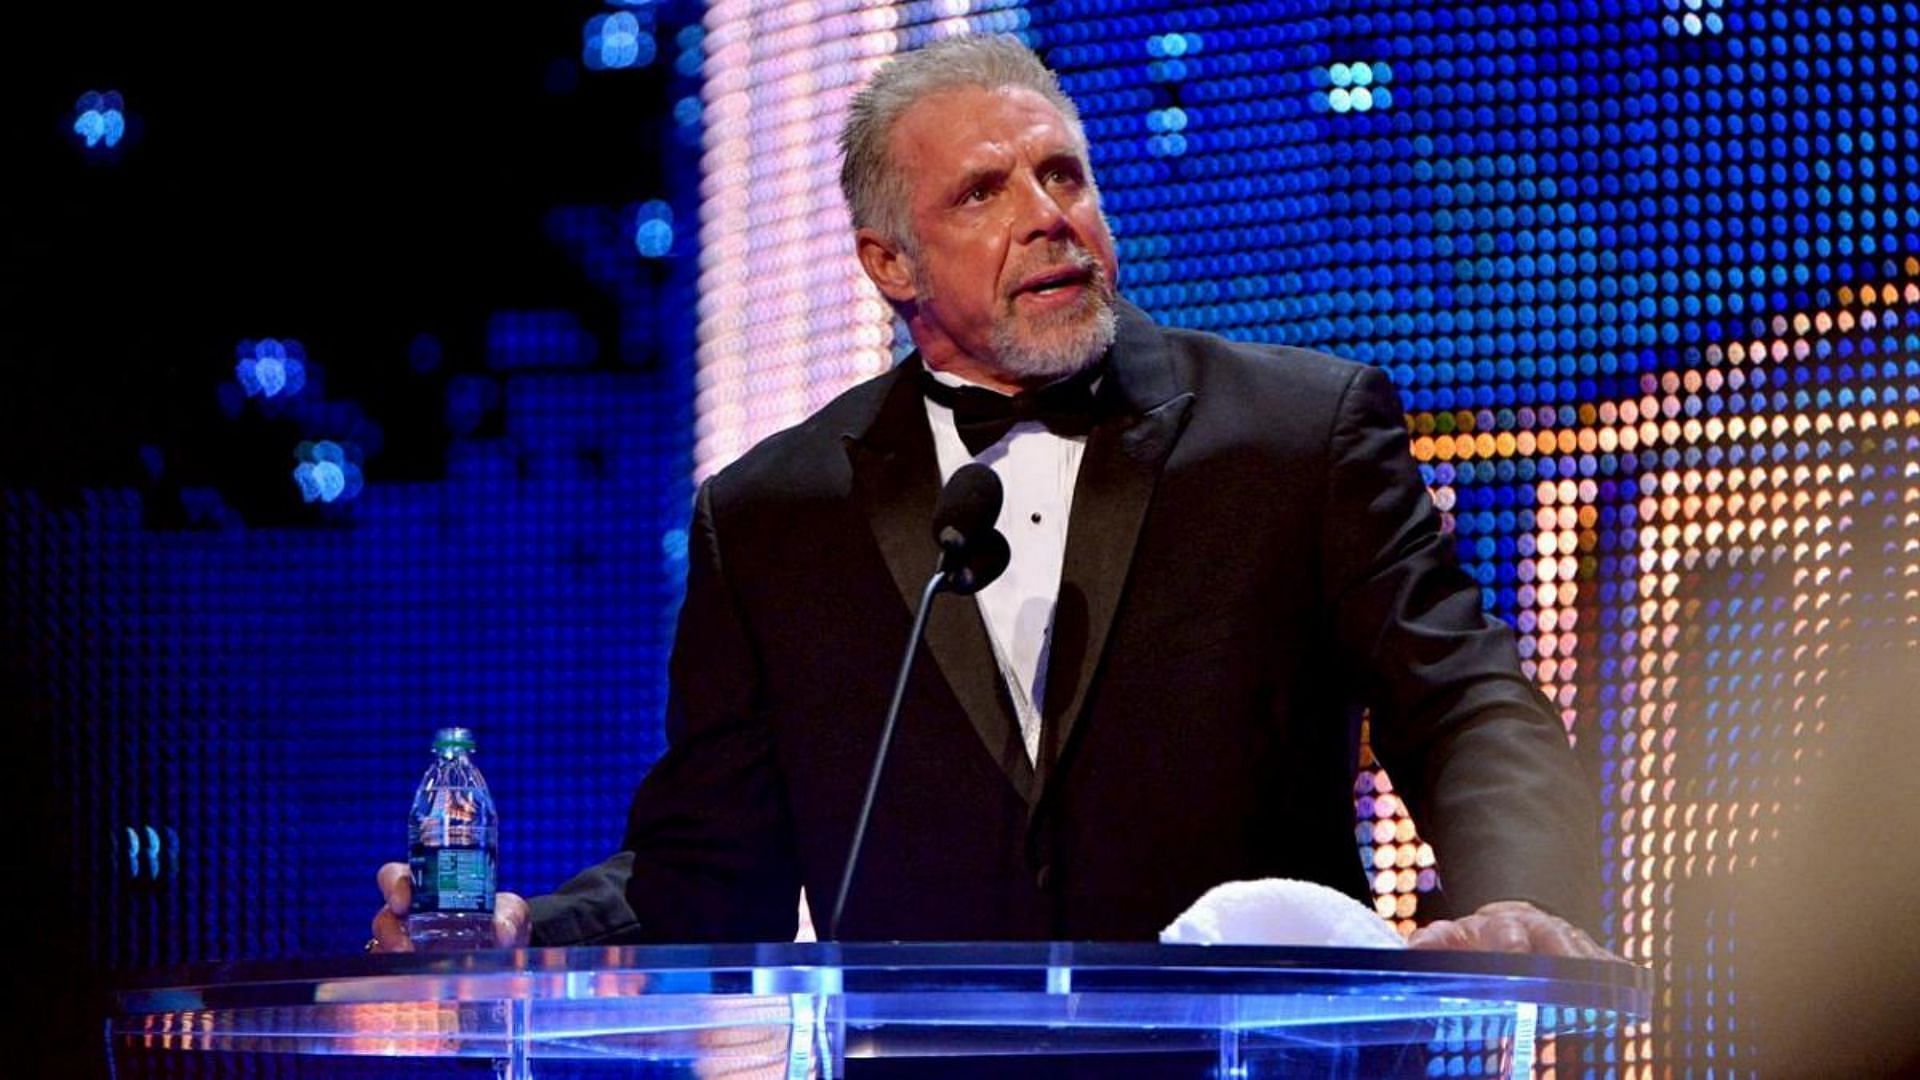 The Ultimate Warrior joined the WWE Hall of Fame in 2014